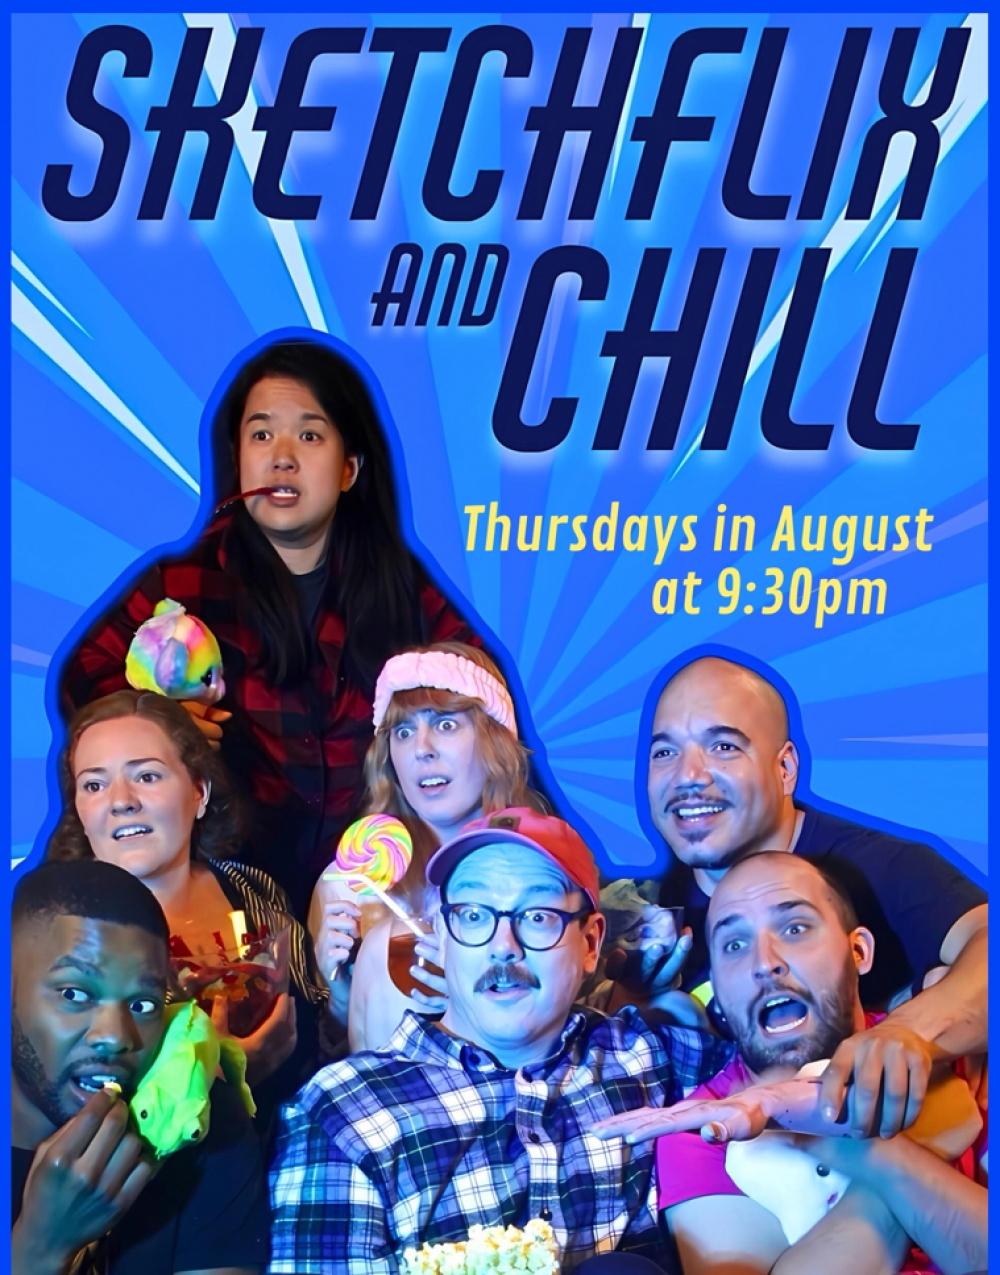 Sketchflix and Chill at The Annoyance Theater